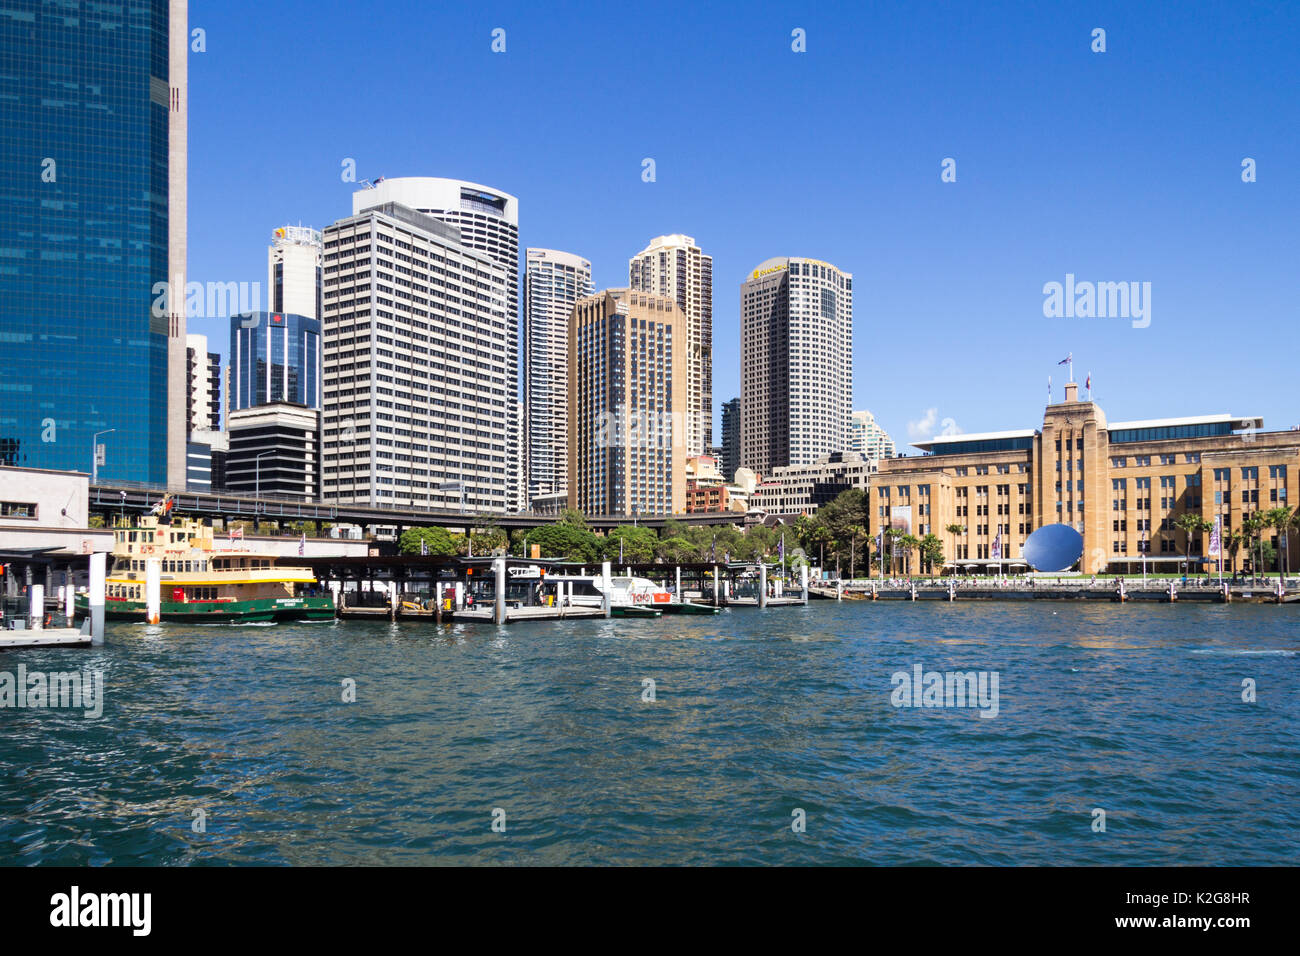 Sydney harbour ferry berths with the Central Business District and the Museum of Contemporary Art in the background, Australia, CBD Stock Photo